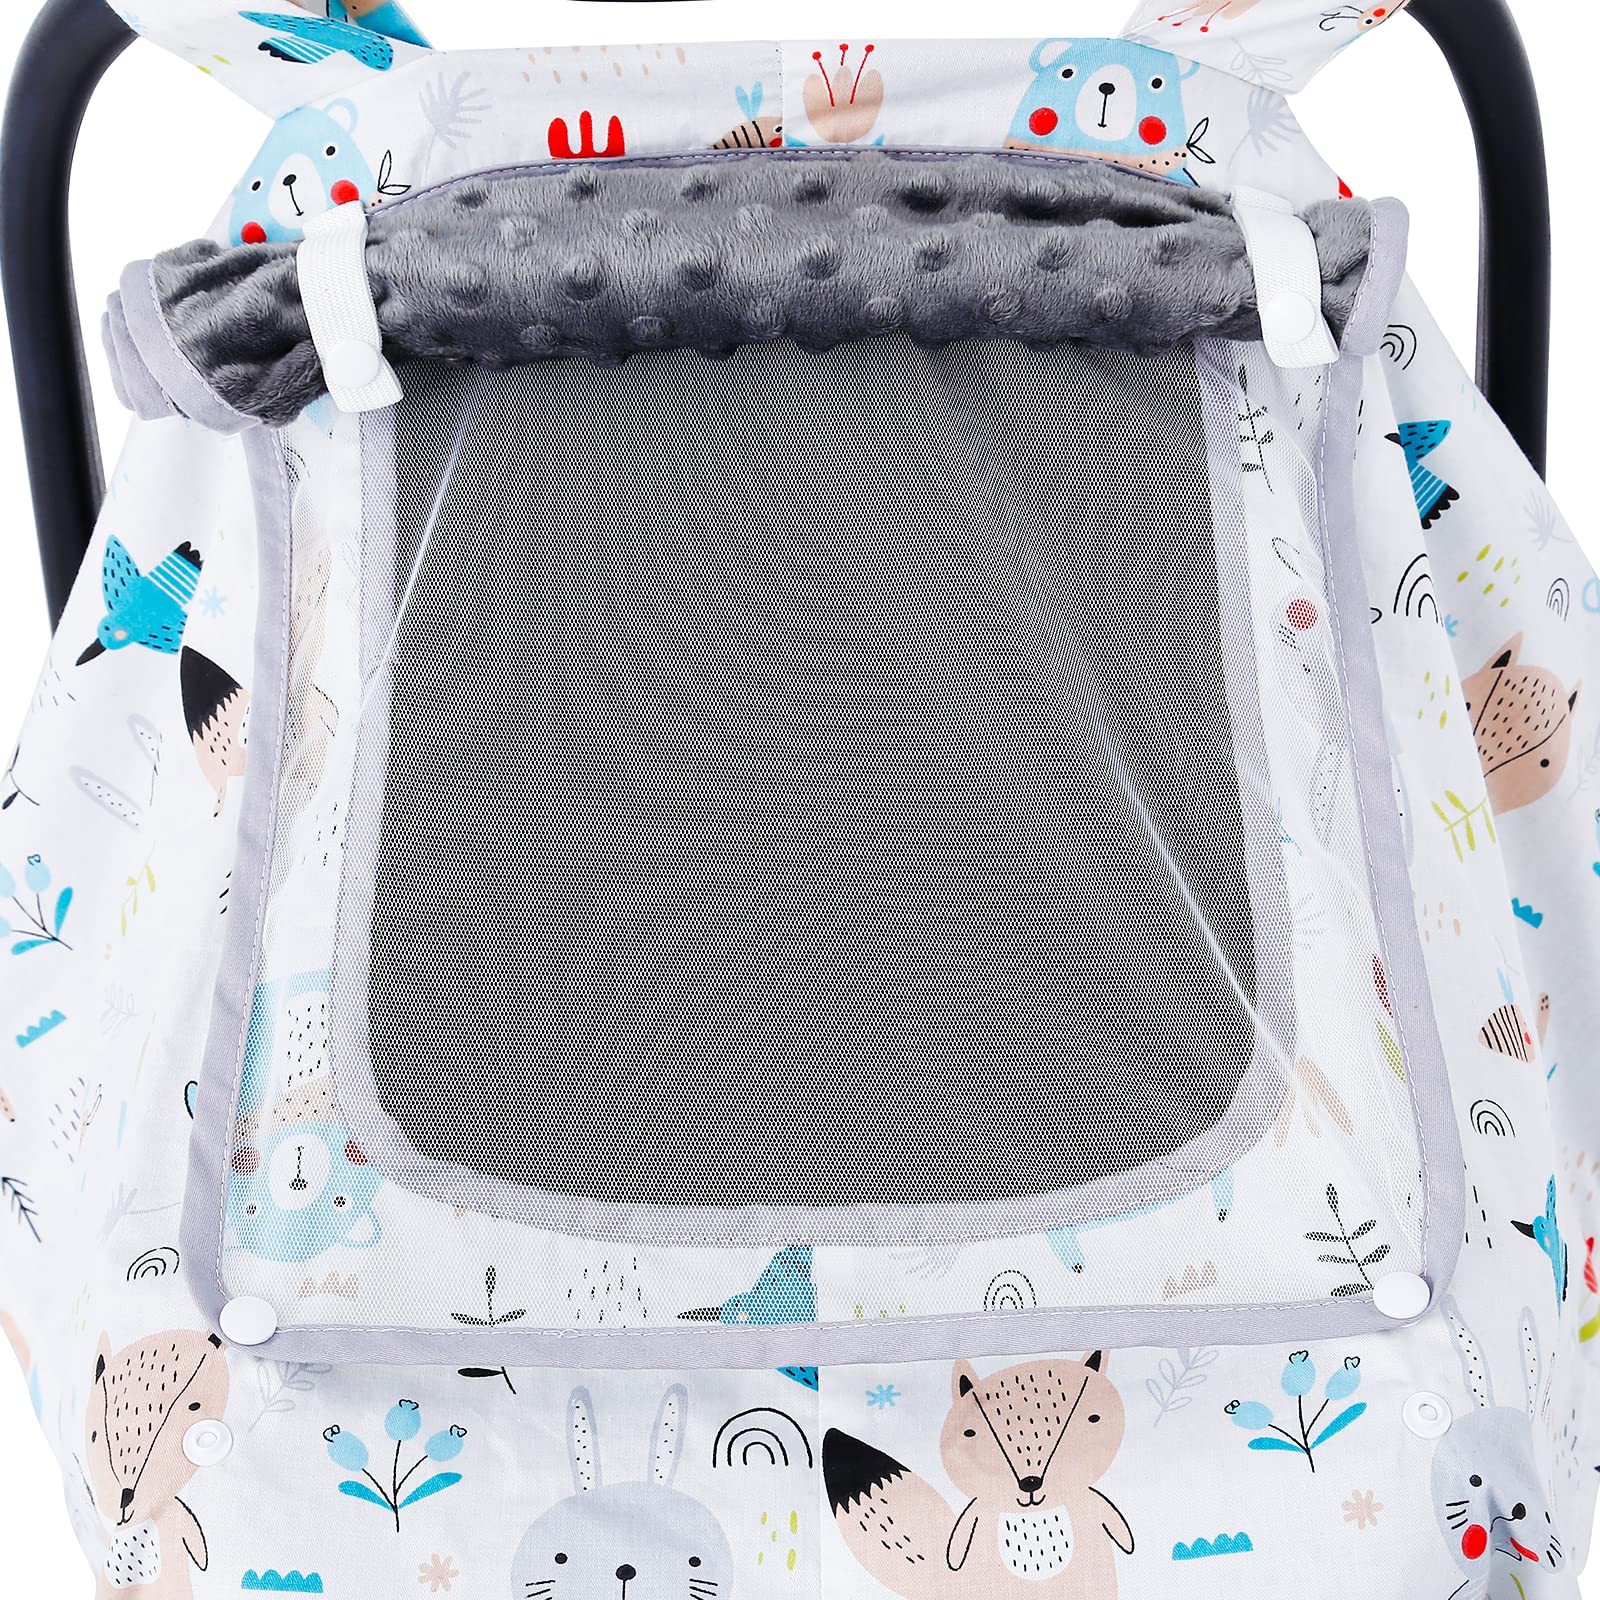 SJEhome Carseat Covers for Babies,Car Seat Warm Windproof Cotton and Fleece Canopy for Newborn Infant Boy Girl Carrier,2 Layers Windows Baby Carrier Cover,Grey Minky